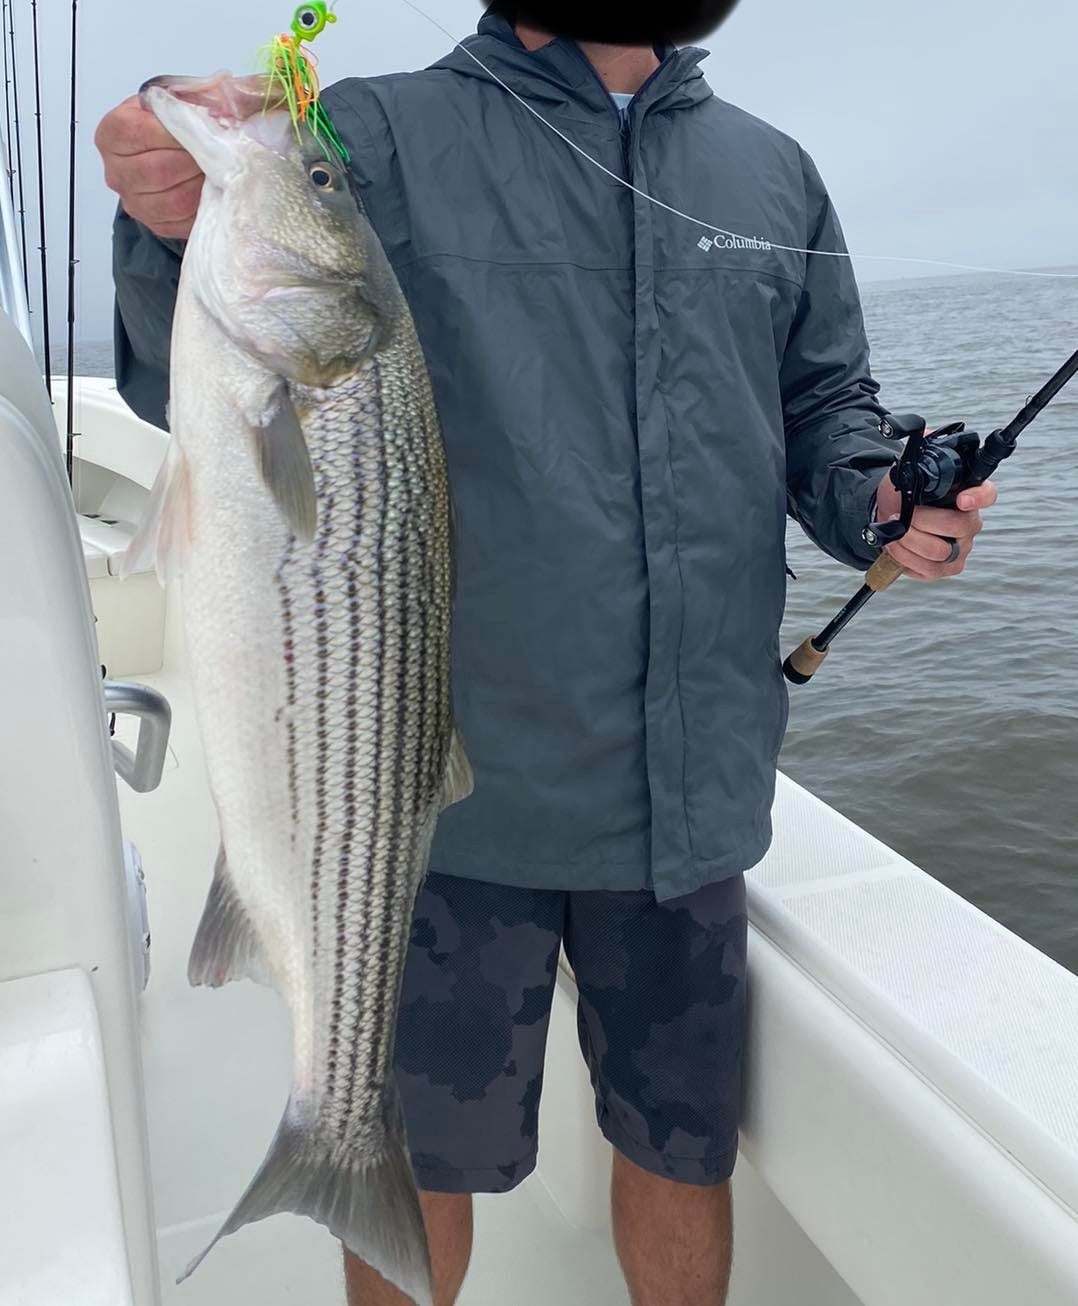 best priced trolling rods for stripers in north east - The Hull Truth -  Boating and Fishing Forum